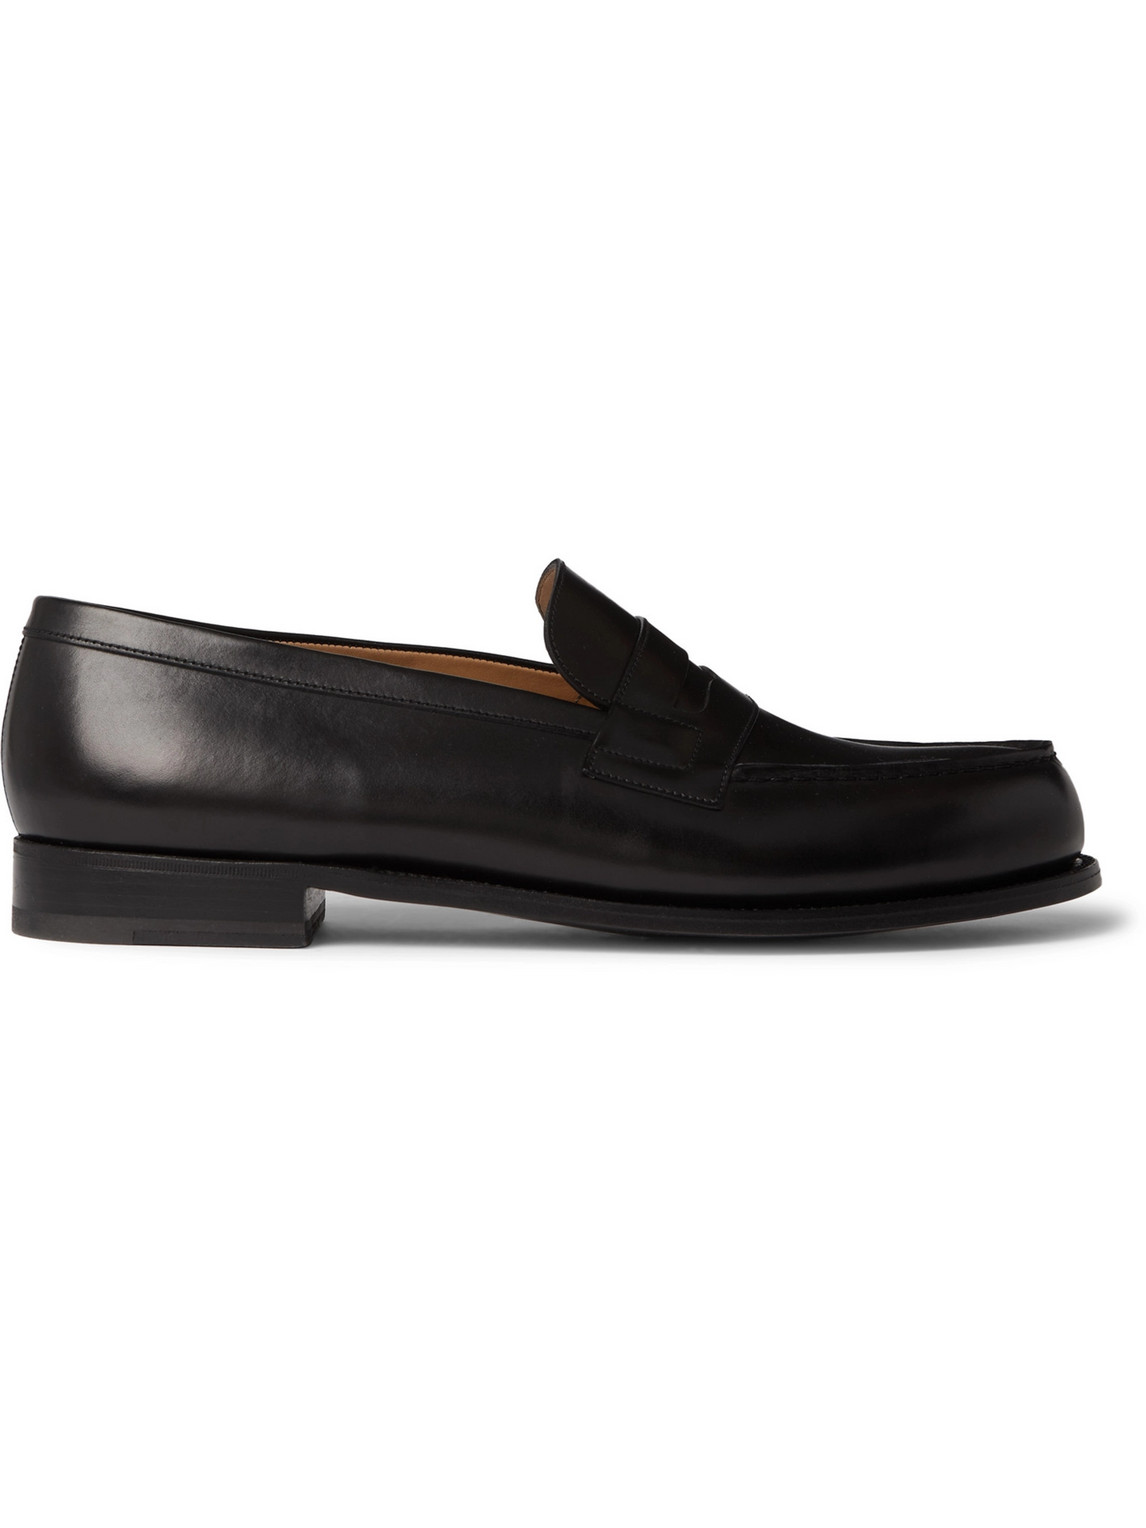 J.m. Weston 180 Moccasin Leather Loafers In Black